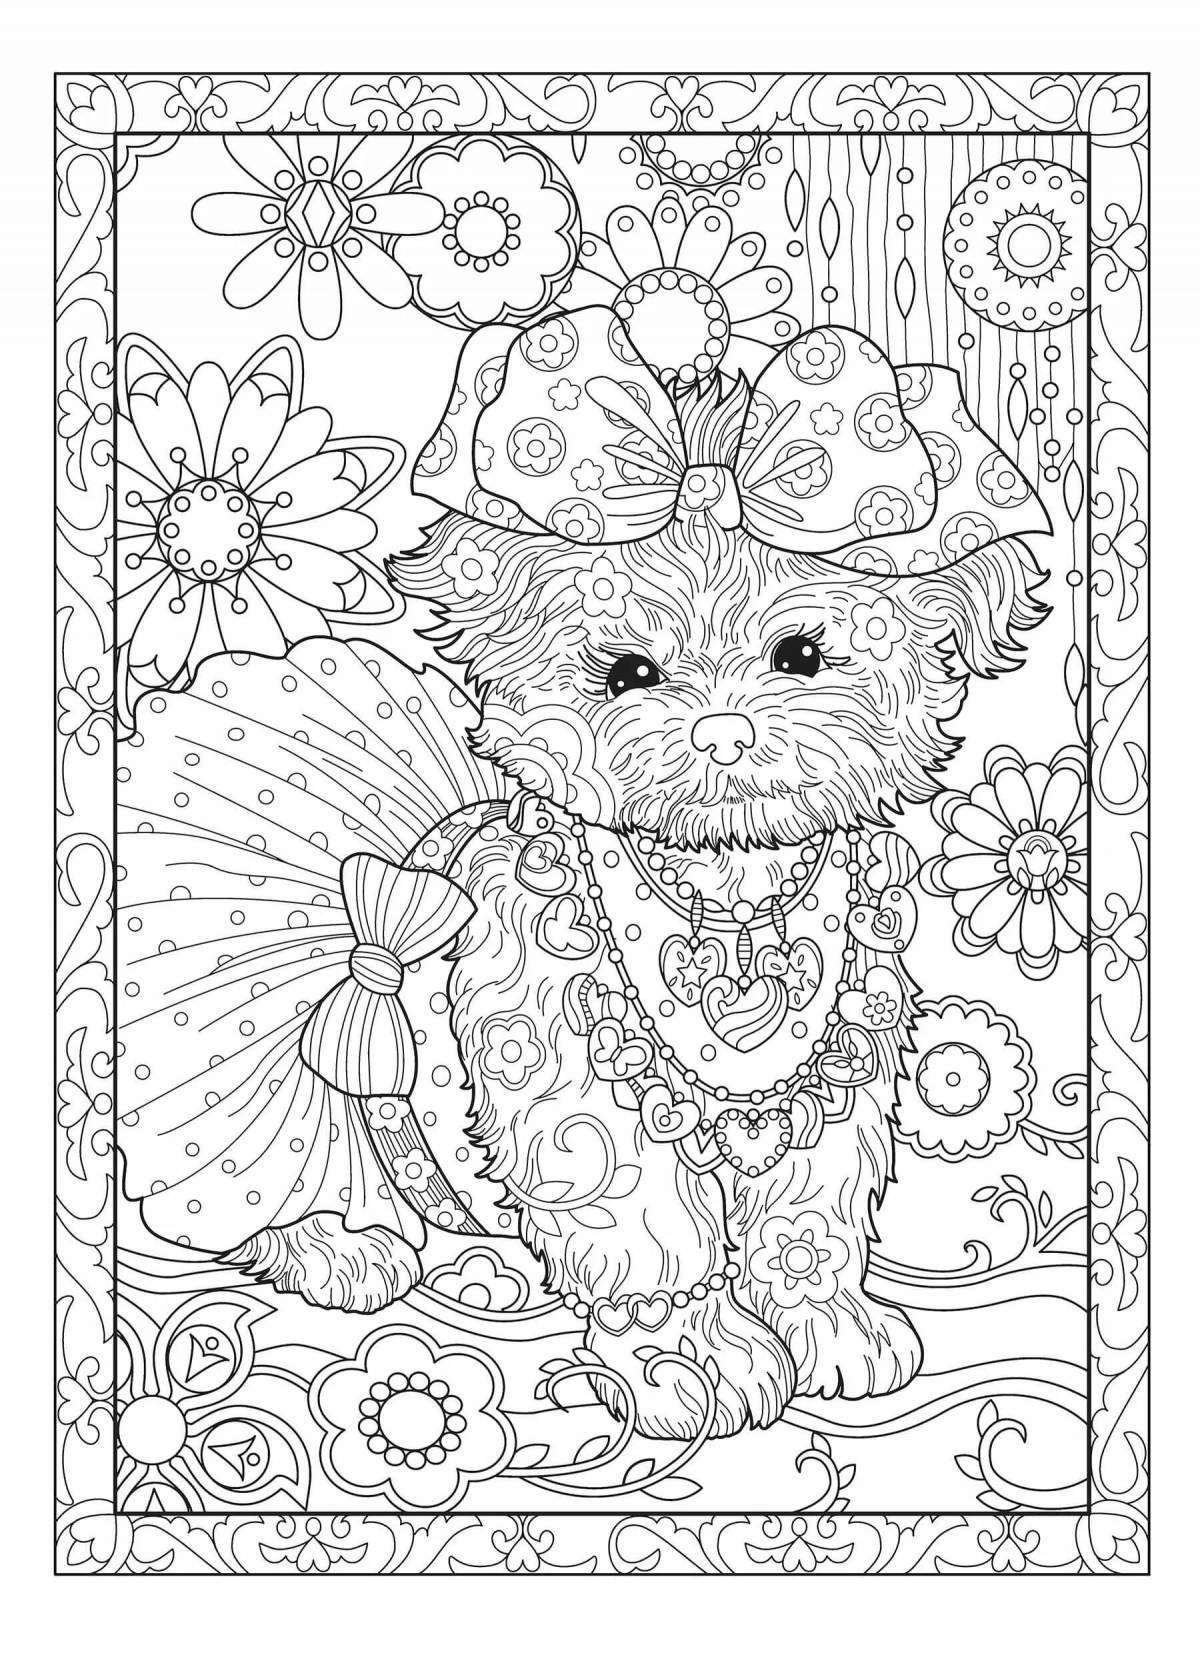 Incredible coloring book for 7 year old girls